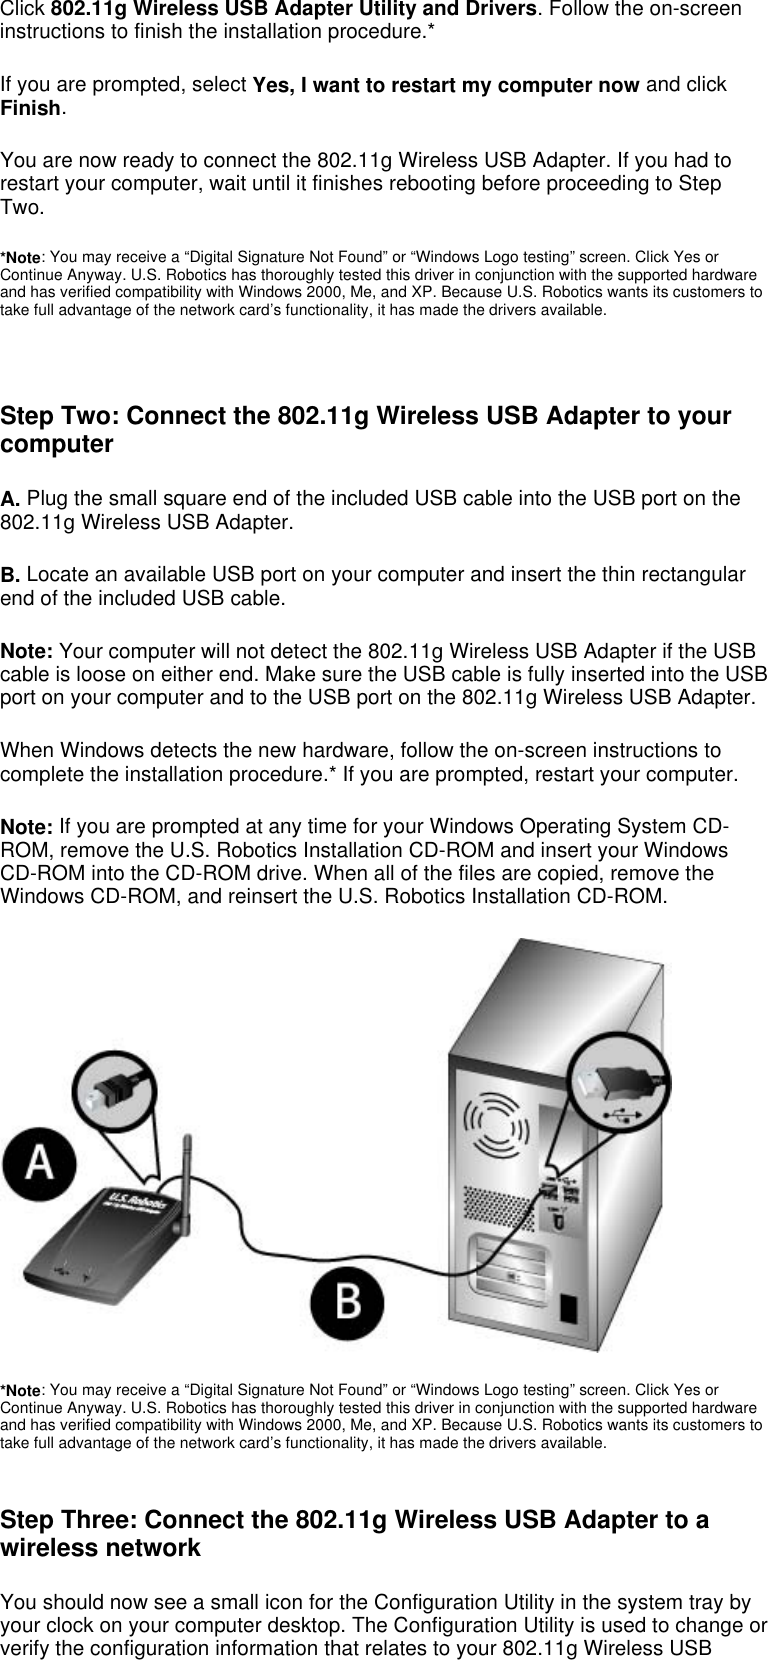  Click 802.11g Wireless USB Adapter Utility and Drivers. Follow the on-screen instructions to finish the installation procedure.* If you are prompted, select Yes, I want to restart my computer now and click Finish. You are now ready to connect the 802.11g Wireless USB Adapter. If you had to restart your computer, wait until it finishes rebooting before proceeding to Step Two. *Note: You may receive a “Digital Signature Not Found” or “Windows Logo testing” screen. Click Yes or Continue Anyway. U.S. Robotics has thoroughly tested this driver in conjunction with the supported hardware and has verified compatibility with Windows 2000, Me, and XP. Because U.S. Robotics wants its customers to take full advantage of the network card’s functionality, it has made the drivers available.    Step Two: Connect the 802.11g Wireless USB Adapter to your computer A. Plug the small square end of the included USB cable into the USB port on the 802.11g Wireless USB Adapter.  B. Locate an available USB port on your computer and insert the thin rectangular end of the included USB cable. Note: Your computer will not detect the 802.11g Wireless USB Adapter if the USB cable is loose on either end. Make sure the USB cable is fully inserted into the USB port on your computer and to the USB port on the 802.11g Wireless USB Adapter. When Windows detects the new hardware, follow the on-screen instructions to complete the installation procedure.* If you are prompted, restart your computer. Note: If you are prompted at any time for your Windows Operating System CD-ROM, remove the U.S. Robotics Installation CD-ROM and insert your Windows CD-ROM into the CD-ROM drive. When all of the files are copied, remove the Windows CD-ROM, and reinsert the U.S. Robotics Installation CD-ROM.  *Note: You may receive a “Digital Signature Not Found” or “Windows Logo testing” screen. Click Yes or Continue Anyway. U.S. Robotics has thoroughly tested this driver in conjunction with the supported hardware and has verified compatibility with Windows 2000, Me, and XP. Because U.S. Robotics wants its customers to take full advantage of the network card’s functionality, it has made the drivers available.  Step Three: Connect the 802.11g Wireless USB Adapter to a wireless network You should now see a small icon for the Configuration Utility in the system tray by your clock on your computer desktop. The Configuration Utility is used to change or verify the configuration information that relates to your 802.11g Wireless USB 